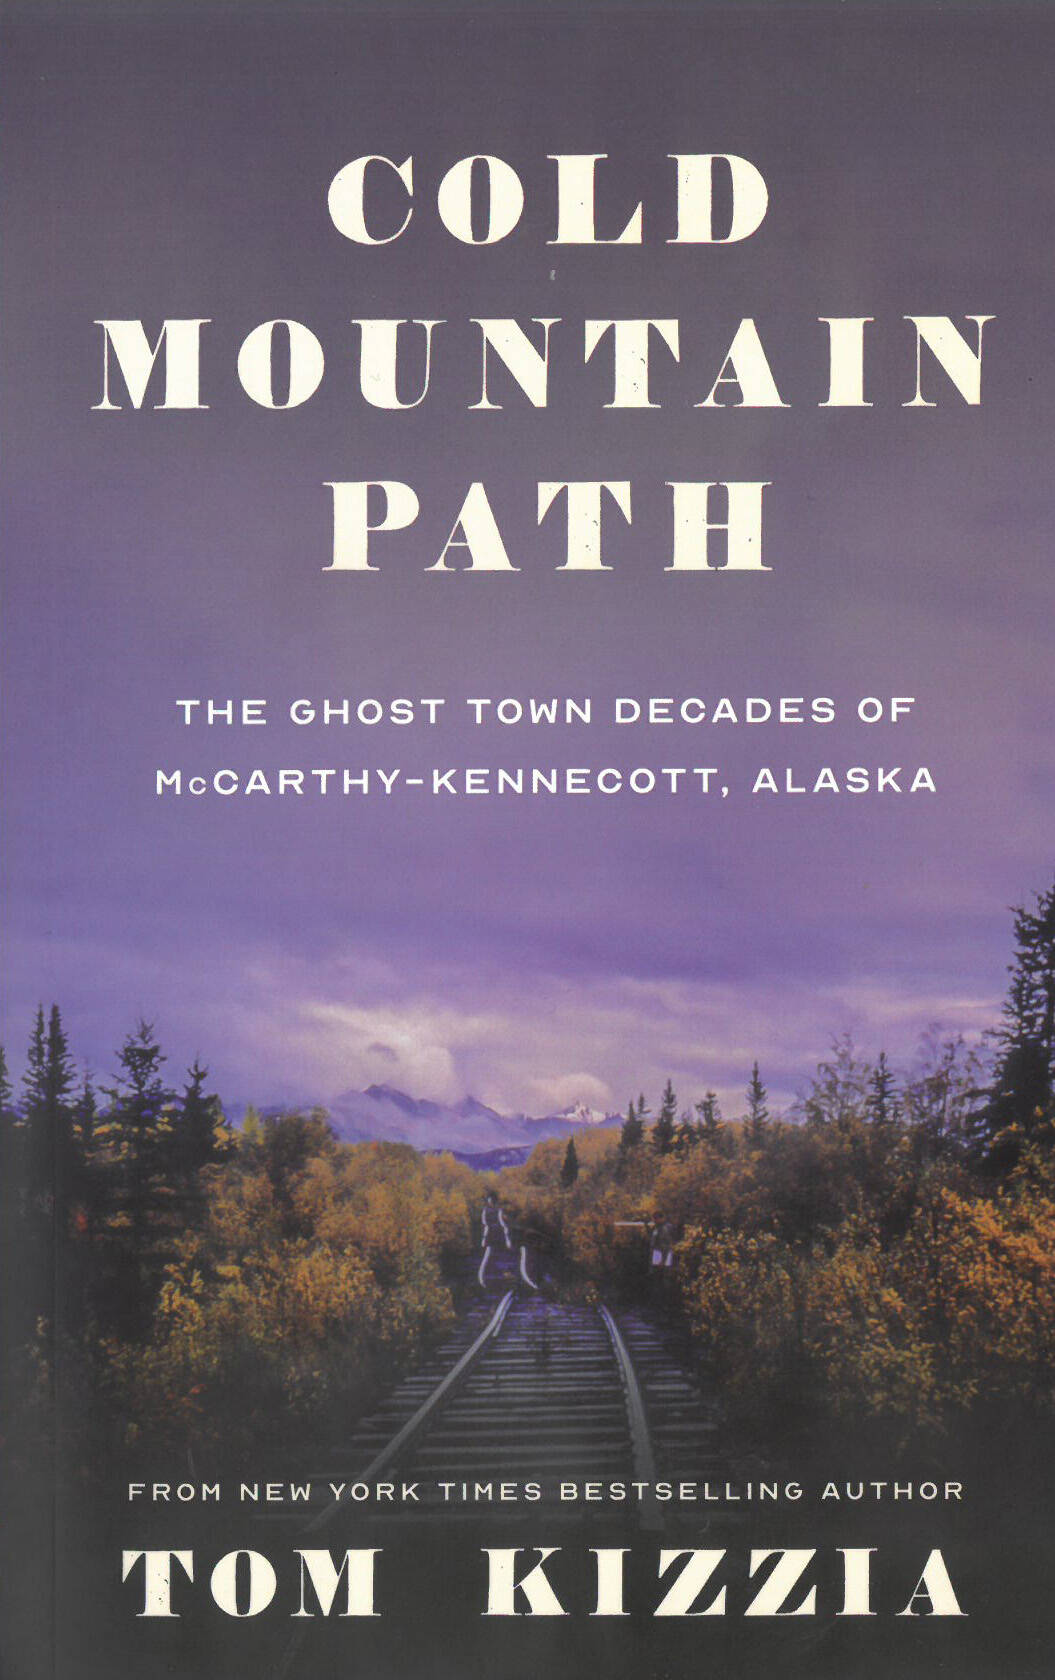 The cover of Tom Kizzia's book, "Cold Mountain Path," published by Porphyry Press in October 2021. (Photo provided)